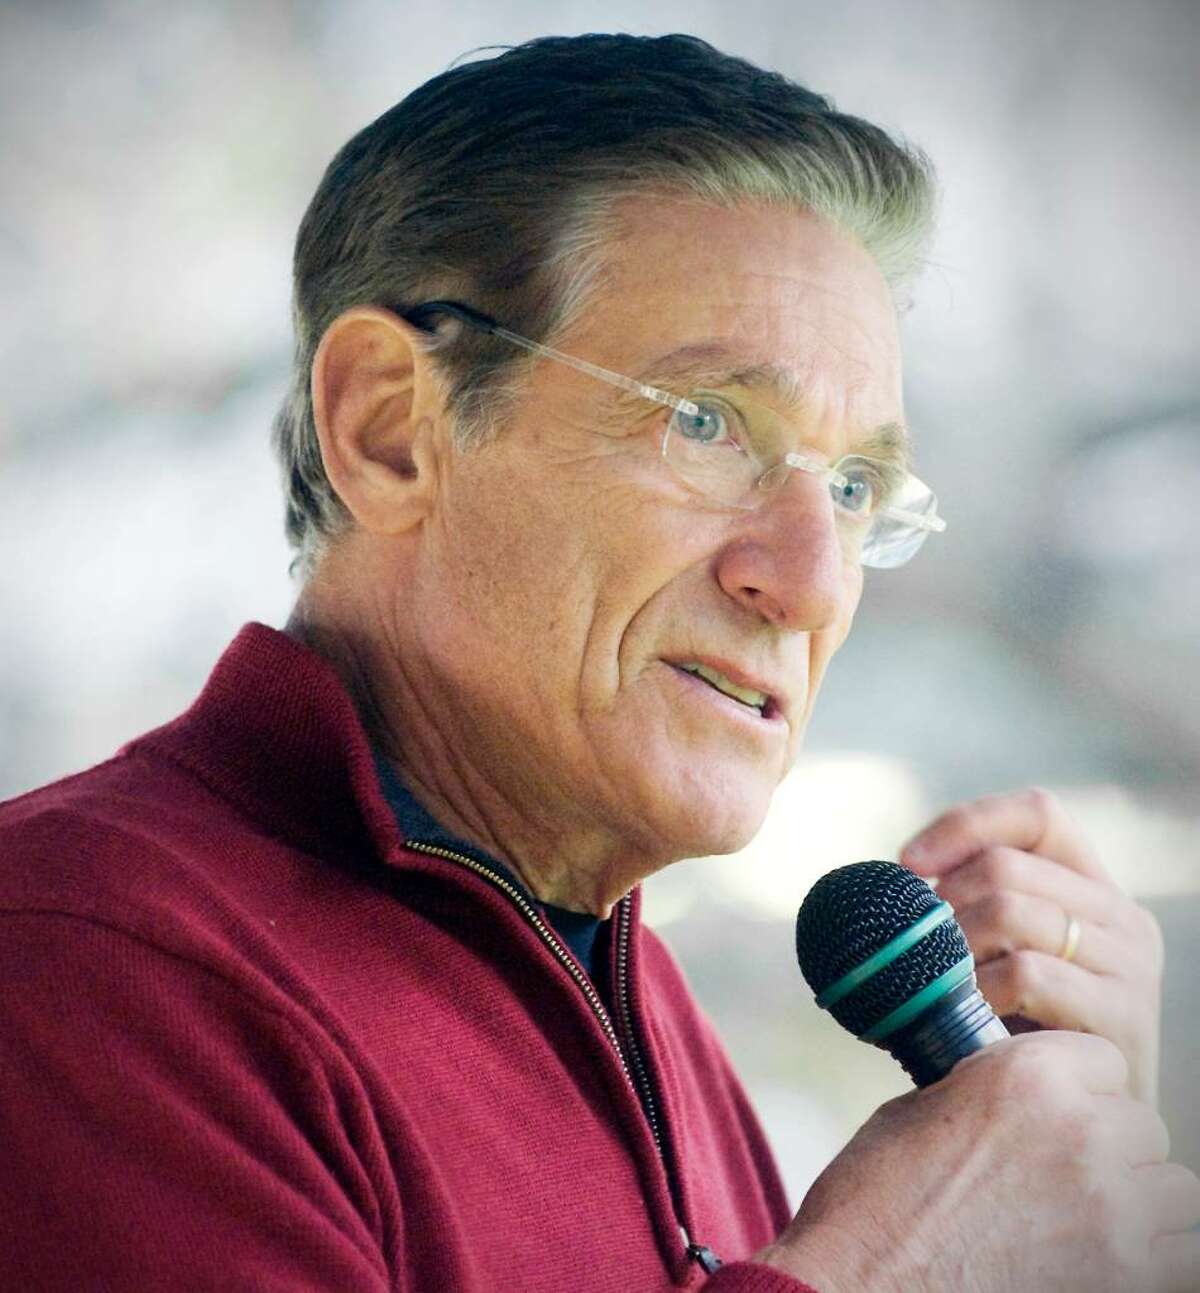 Talk show host Maury Povich addresses the crowd at a balloon training session and press conference in Latham Park for the 2009 UBS Parade Spectacular in Stamford, Conn. on Thursday, November 12, 2009. Povich and his wife Connie Chung are the grand marshals of the parade.